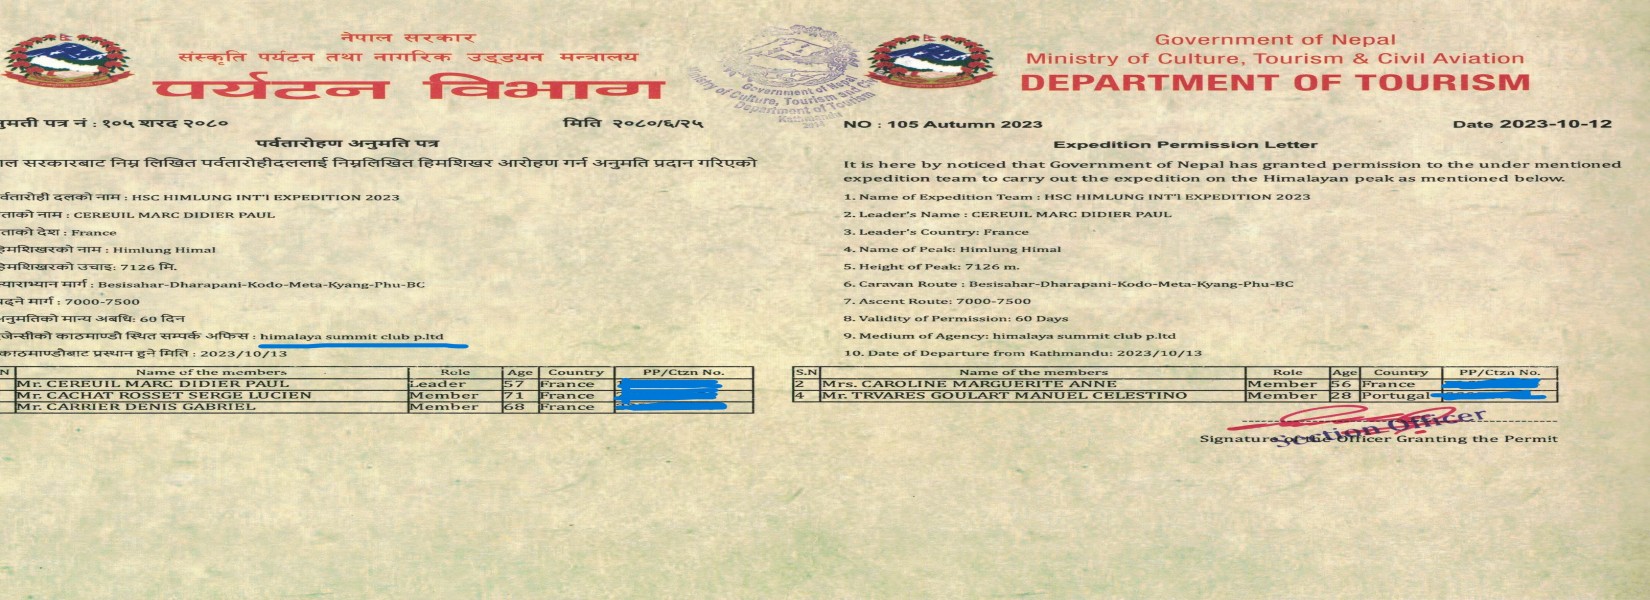 Mt. Himlung Permit from Department of Tourism